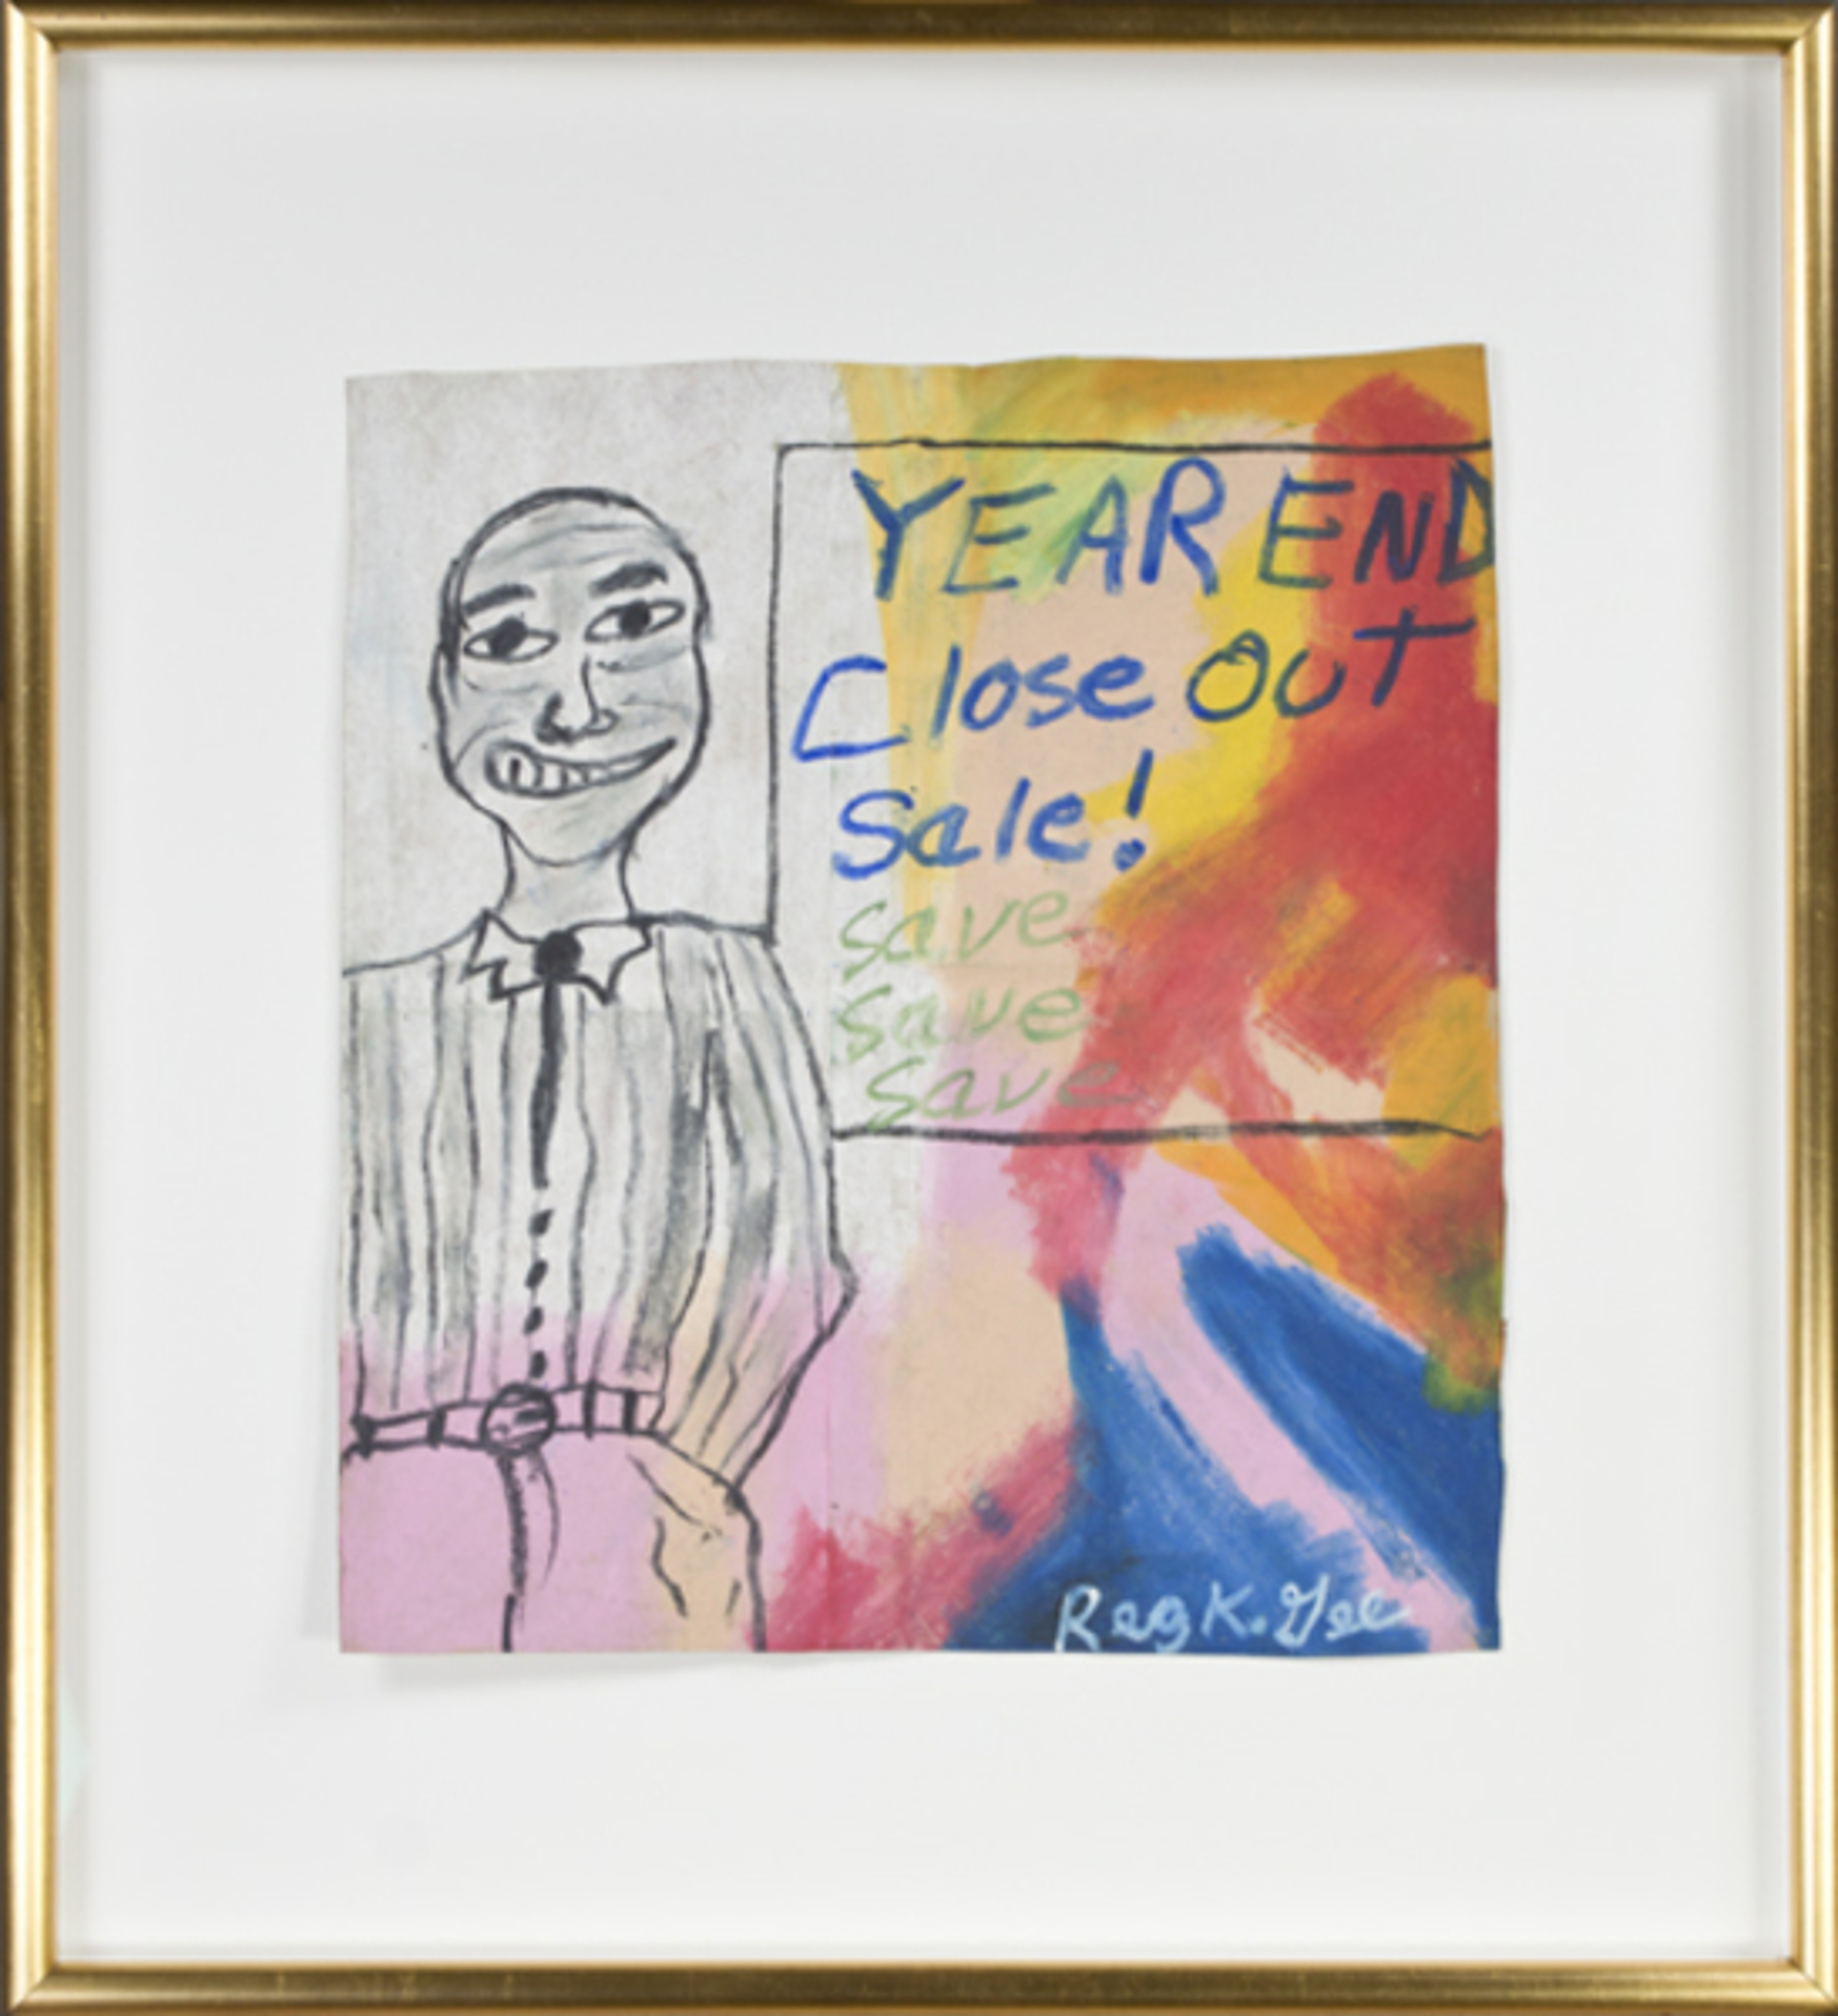 Year End Close Out Sale by Reginald K. Gee